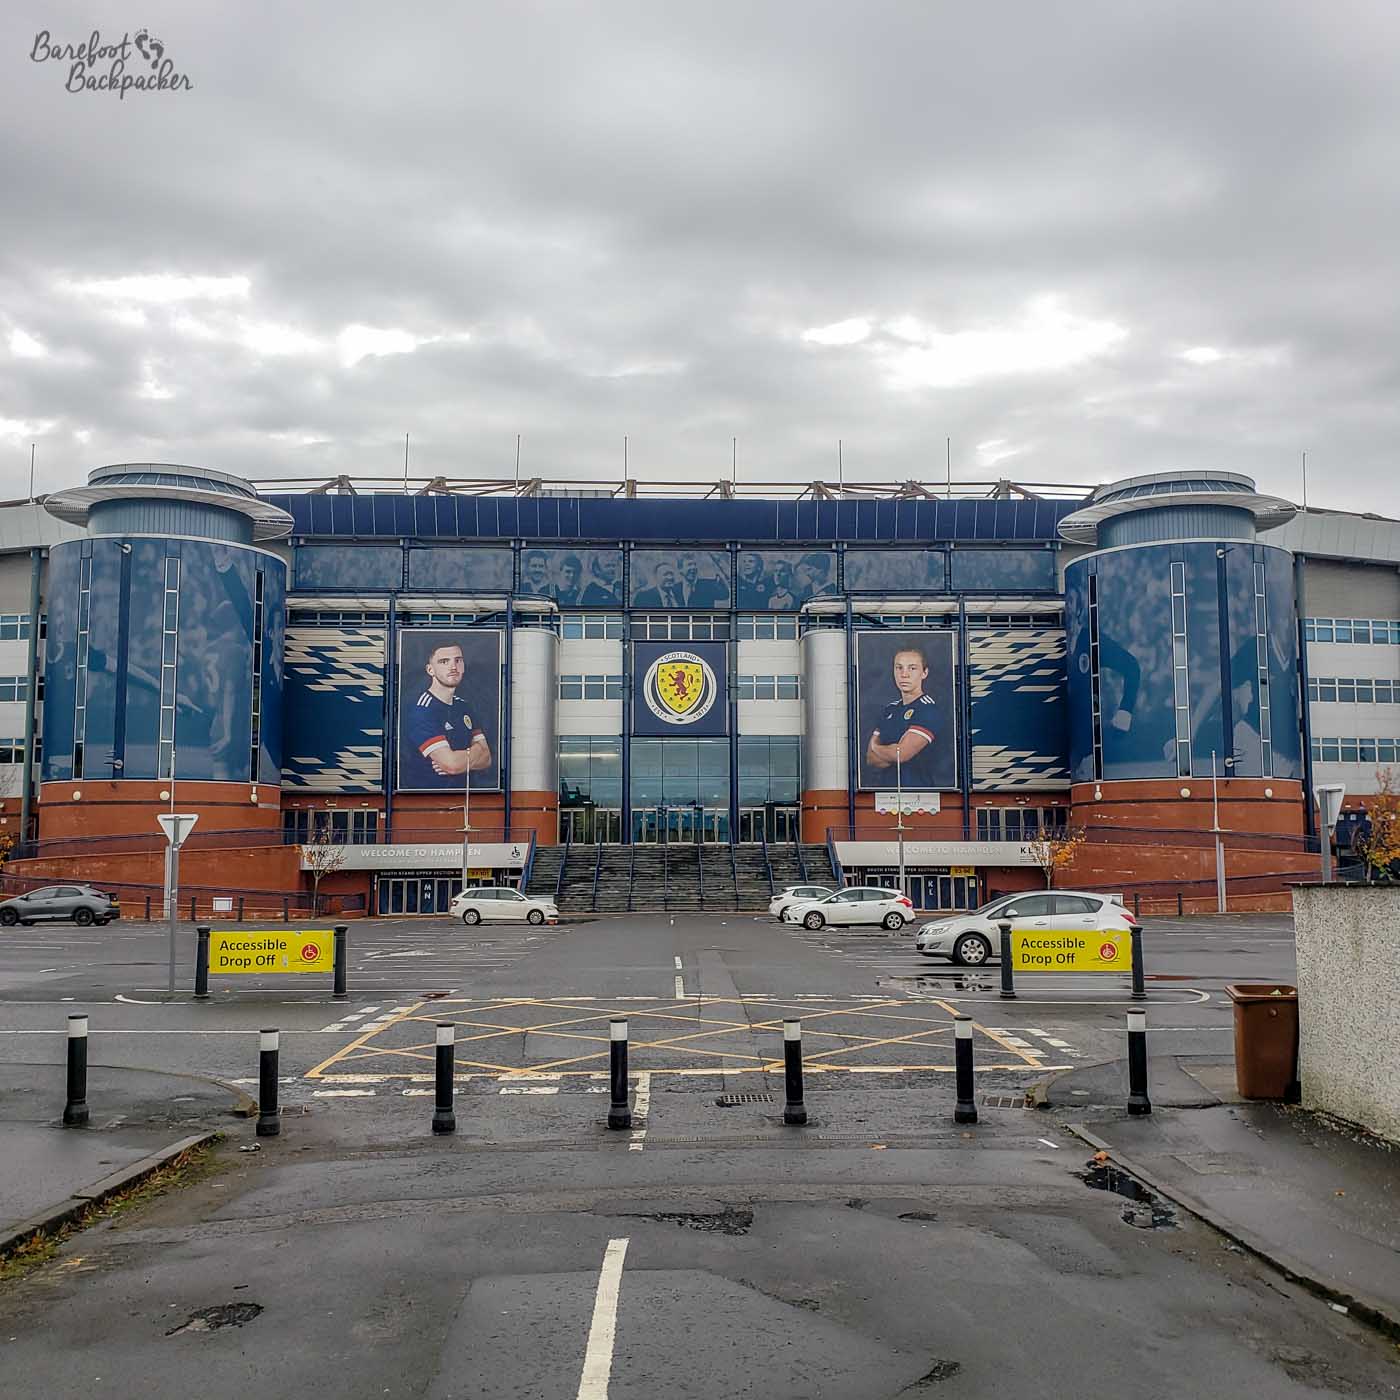 A car park, beyond which is a stone staircase leading up to a building. On either side of the portico are huge pictures of Scottish footballers and, to the sides of those, two large rounded columns/towers.